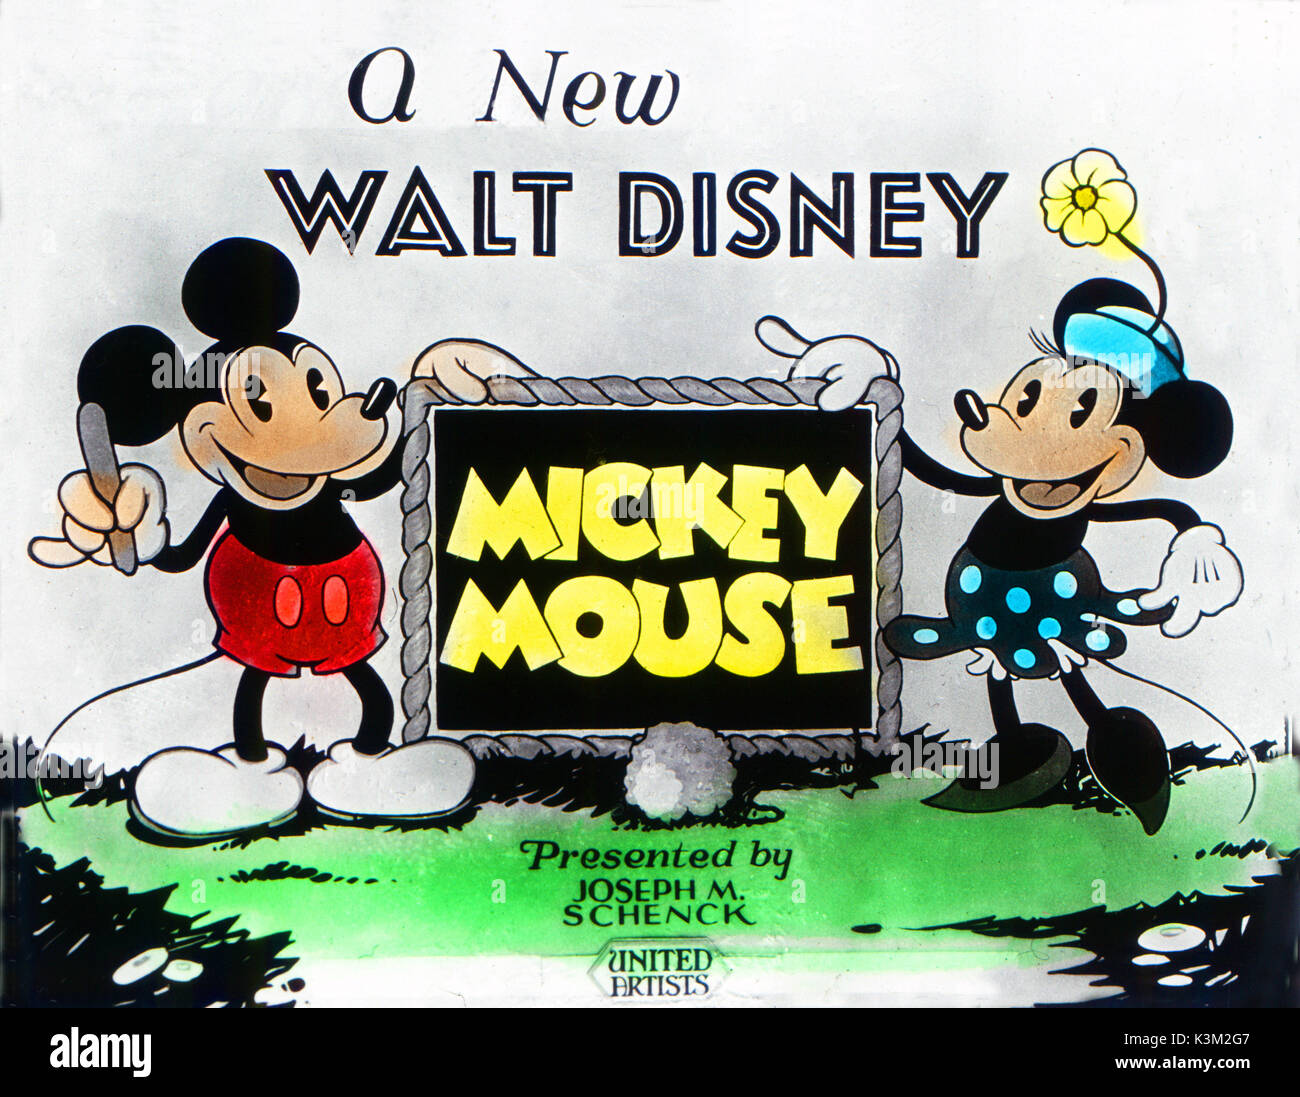 Cinema announcement slide advertising A NEW WALT DISNEY MICKEY MOUSE and showing MICKEY MOUSE and MINNIE MOUSE Stock Photo